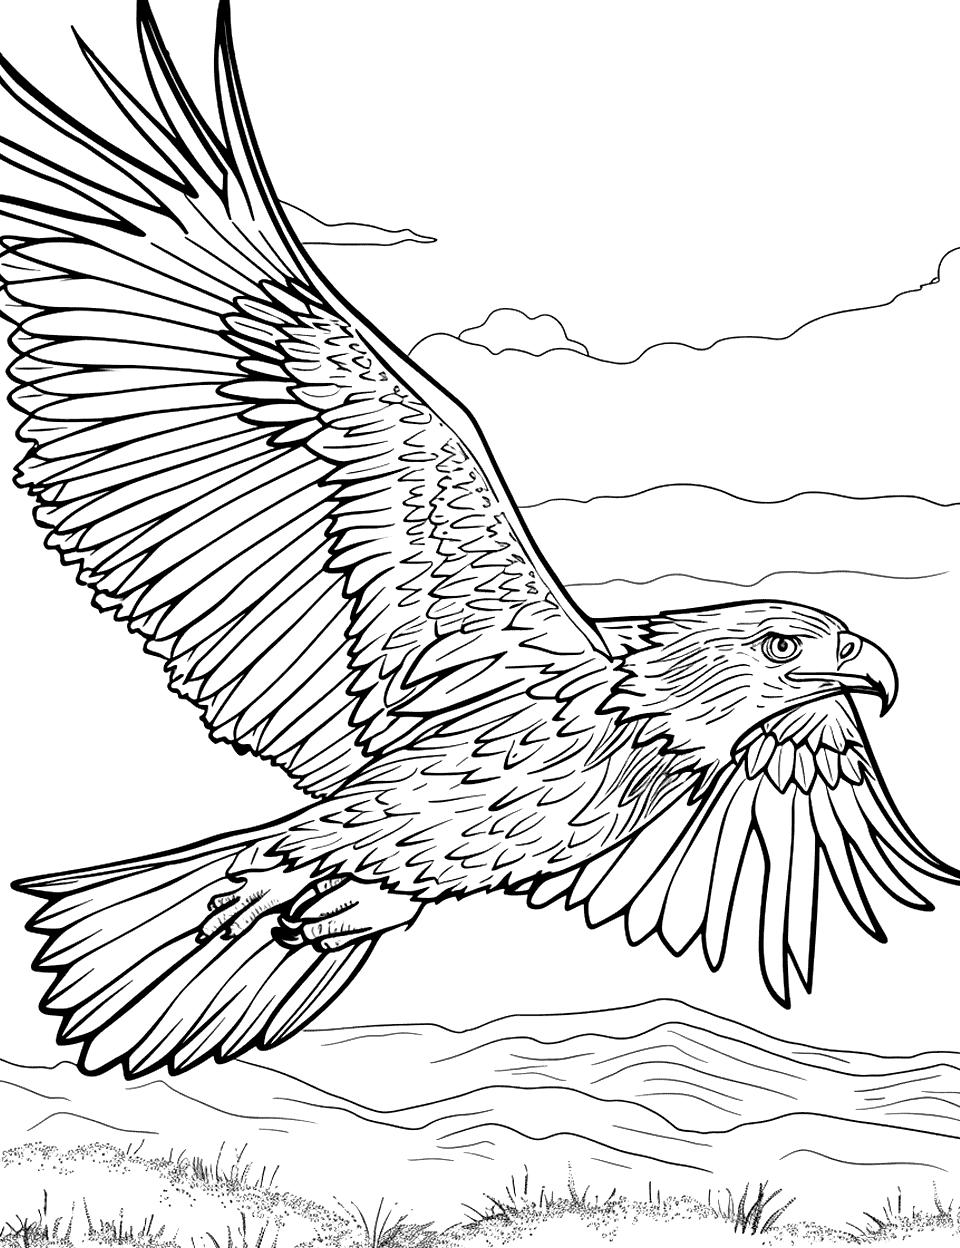 Majestic Golden Eagle in Flight Coloring Page - A powerful golden eagle soars high in the sky with its wings fully extended, gliding over a simple meadow.